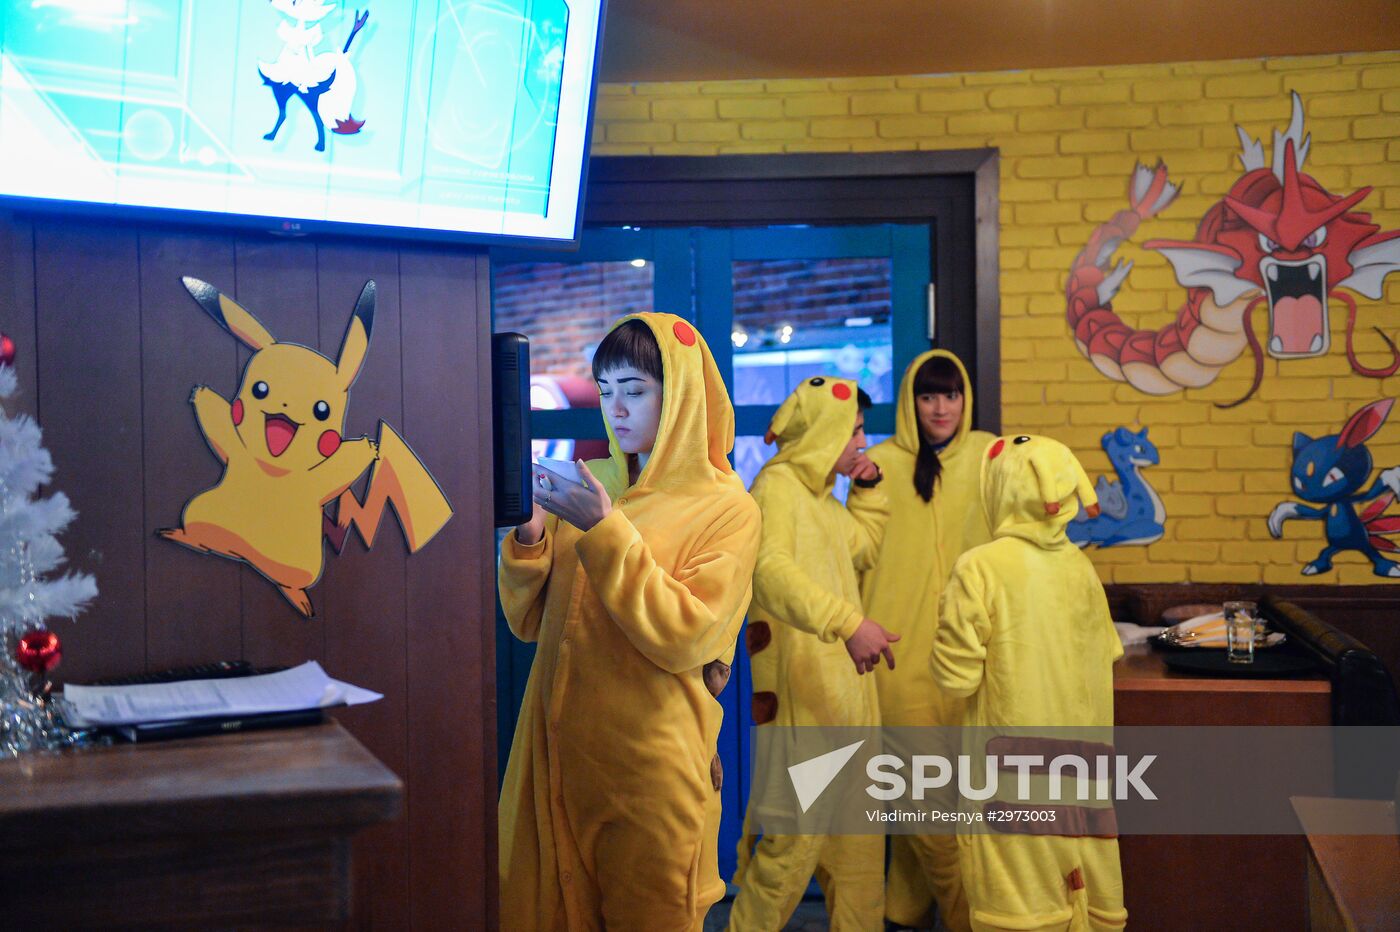 Pokeville Cafe in Moscow